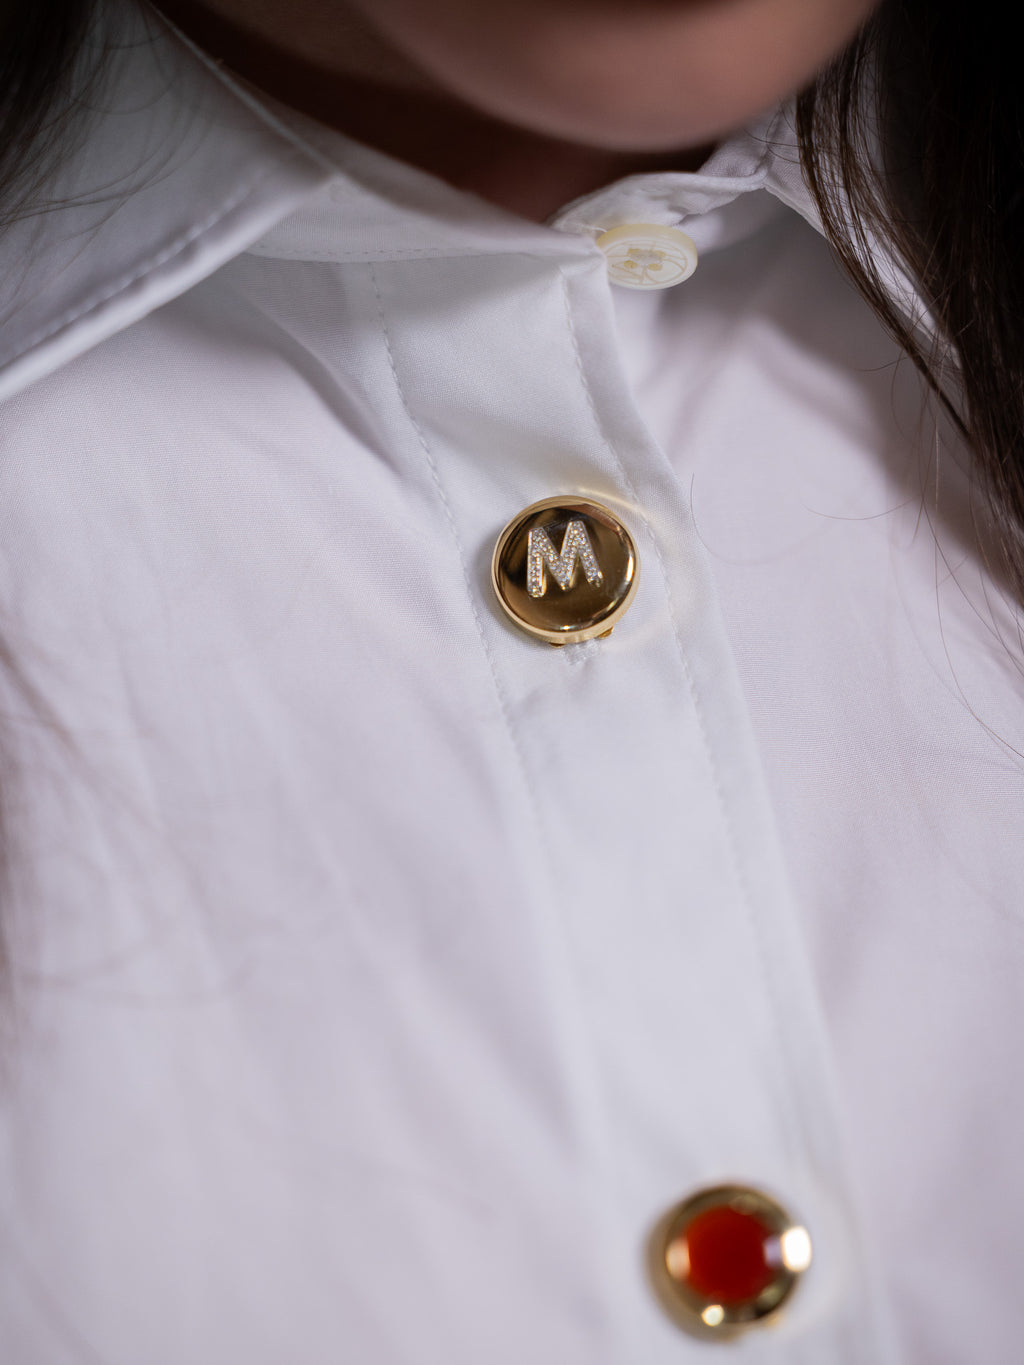 Gold button cover with diamond M on white shirt.